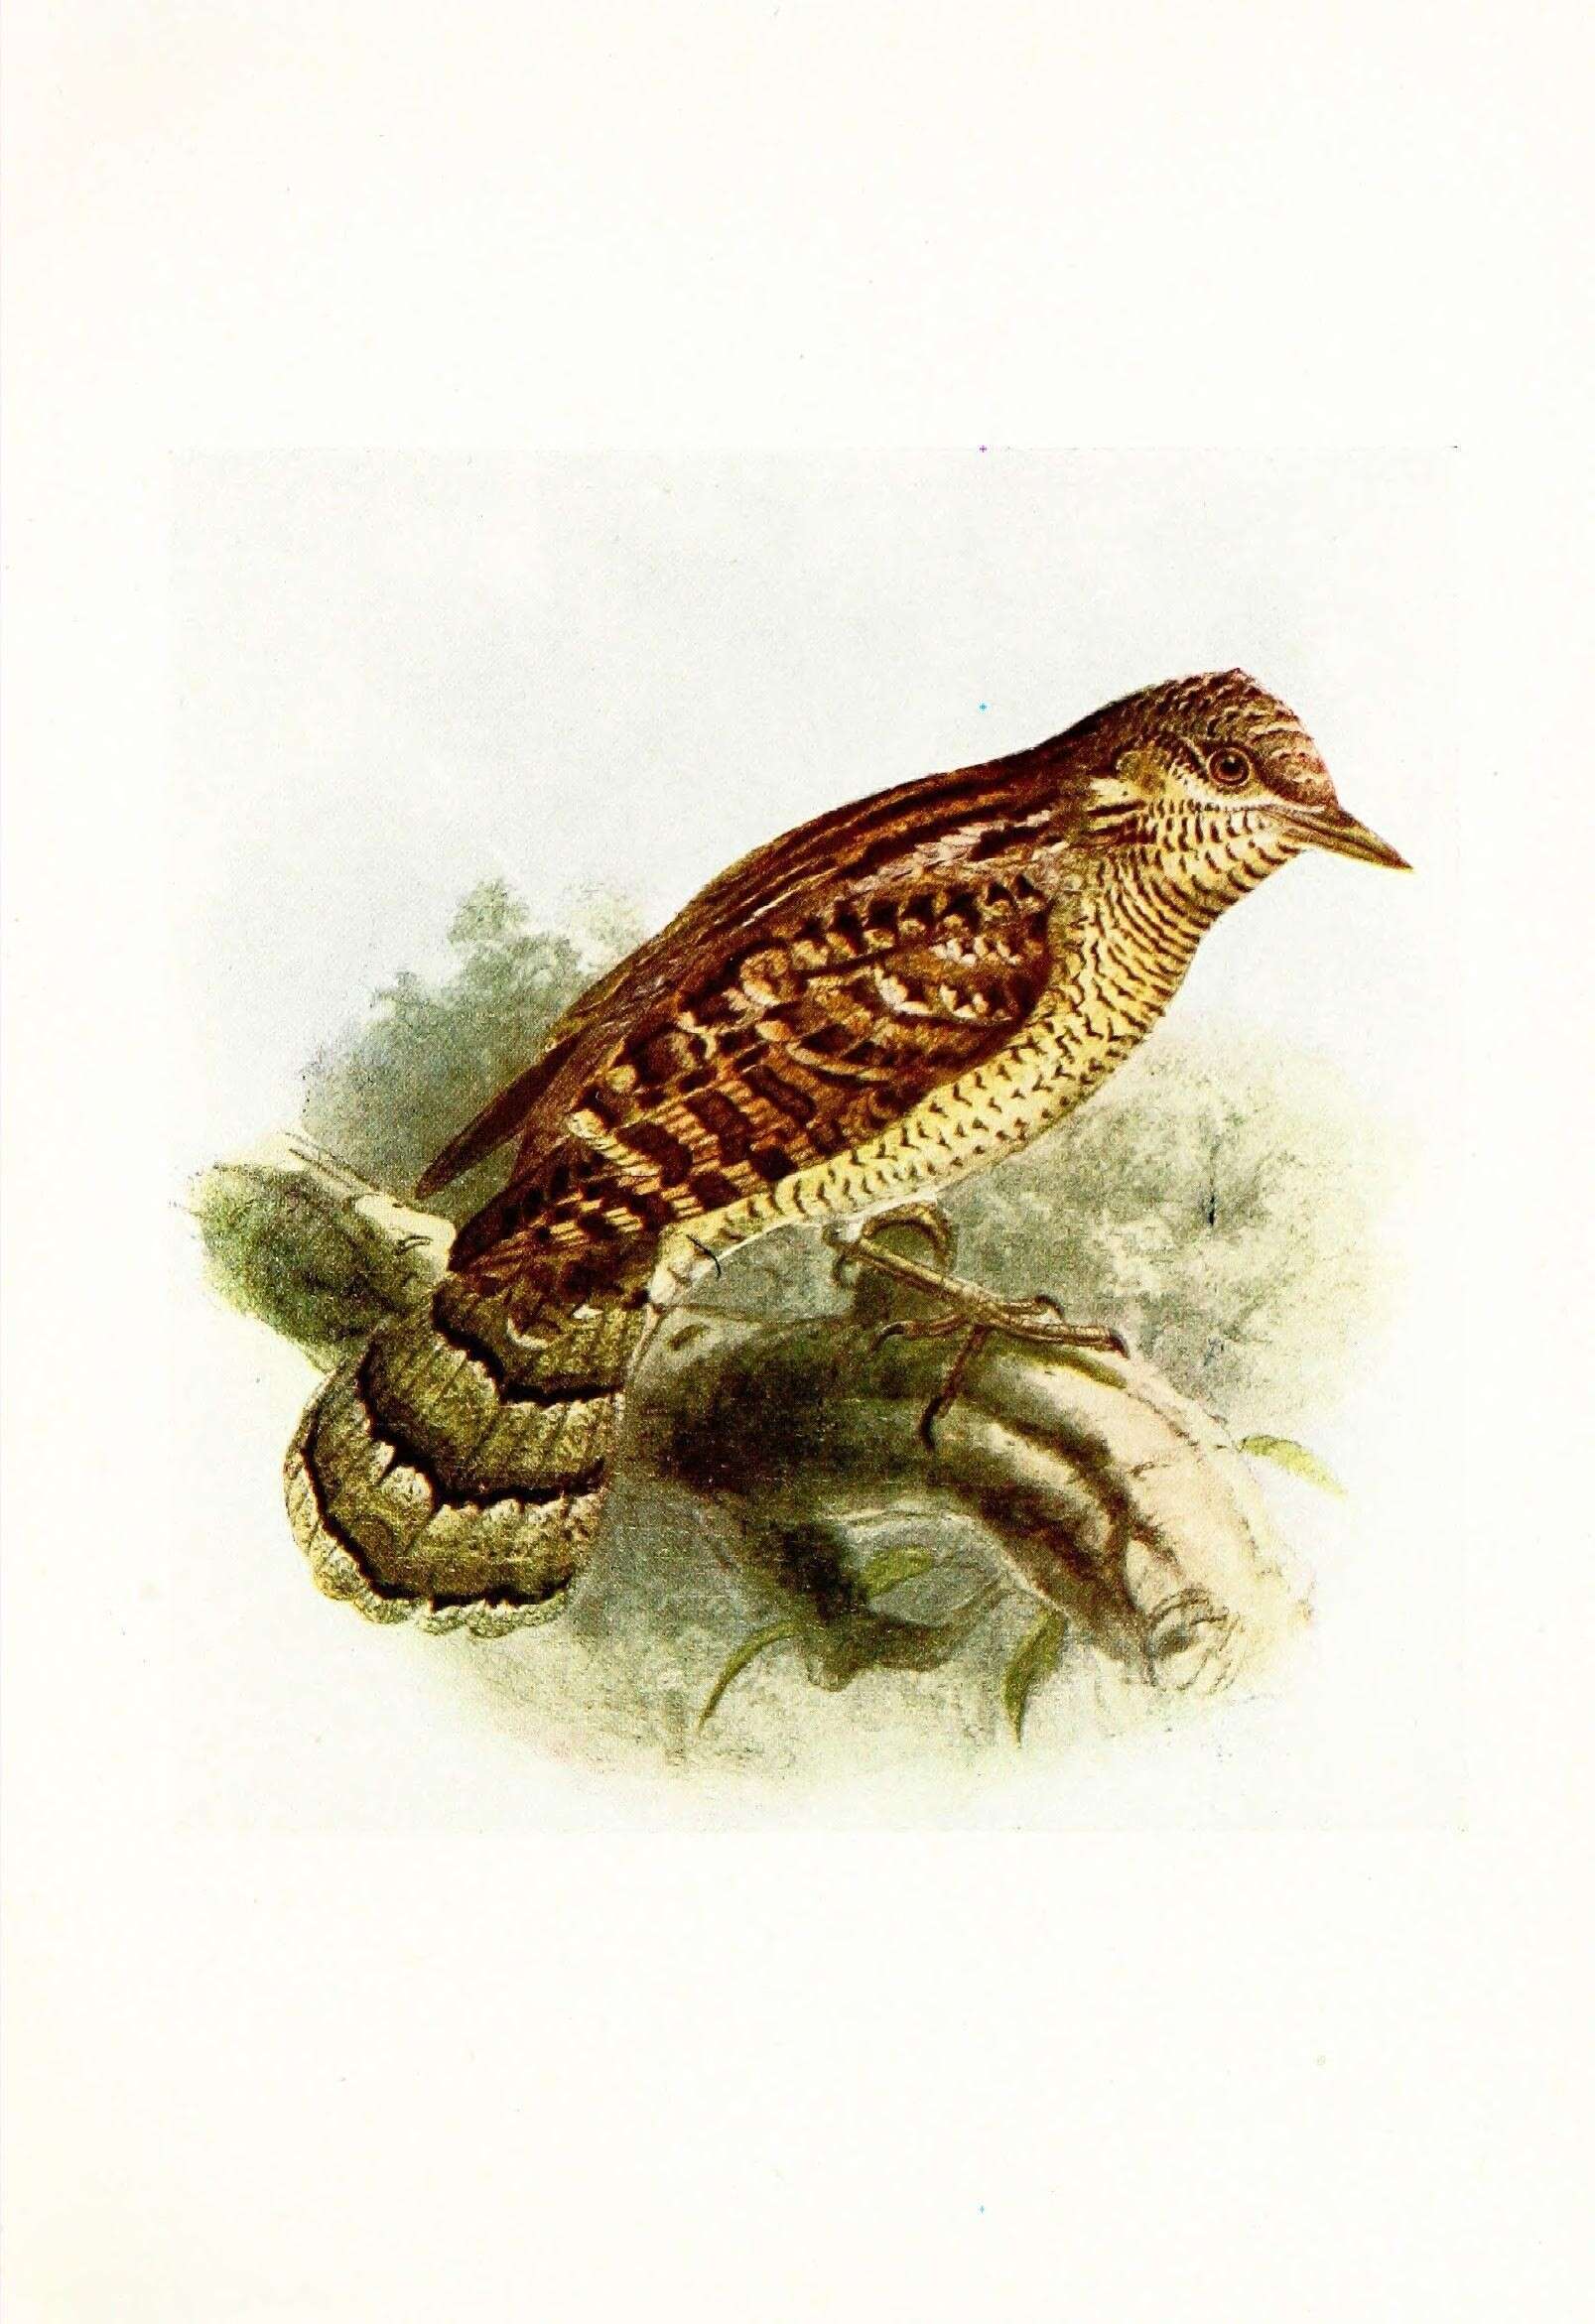 Image of Wryneck